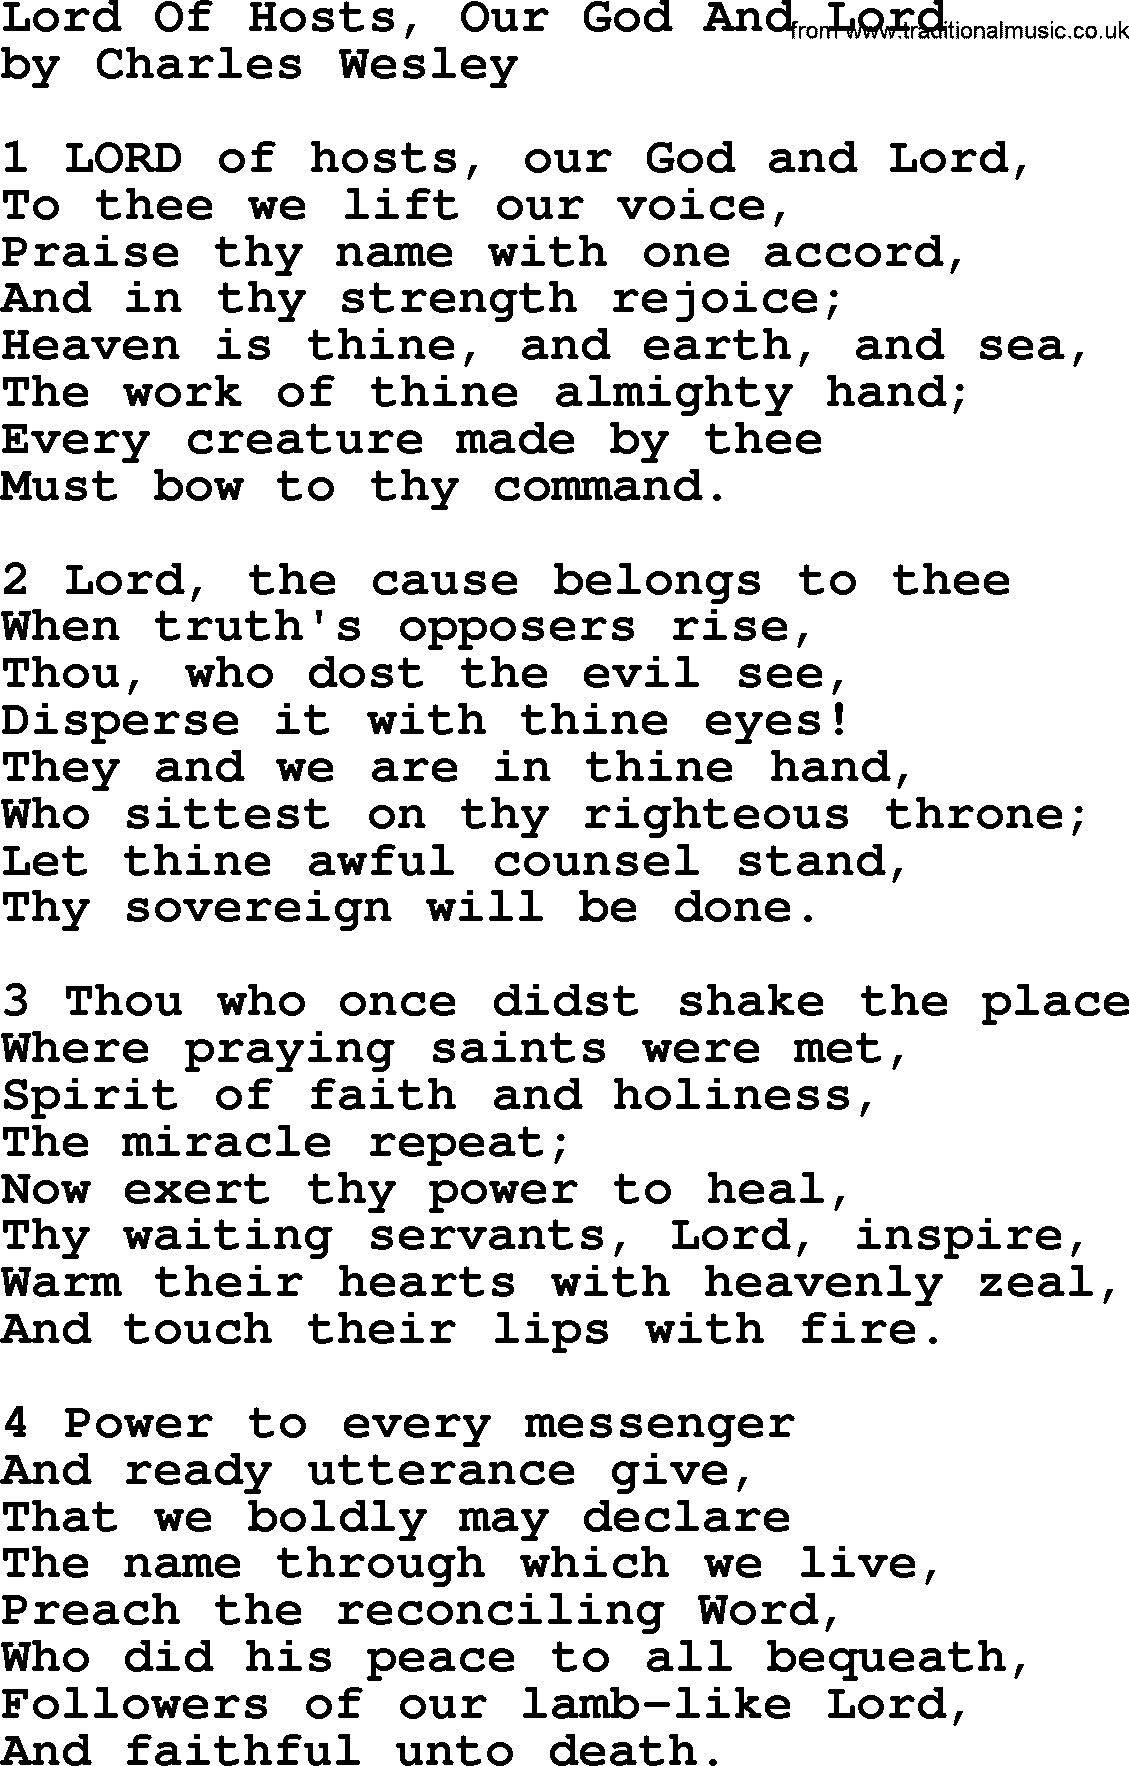 Charles Wesley hymn: Lord Of Hosts, Our God And Lord, lyrics